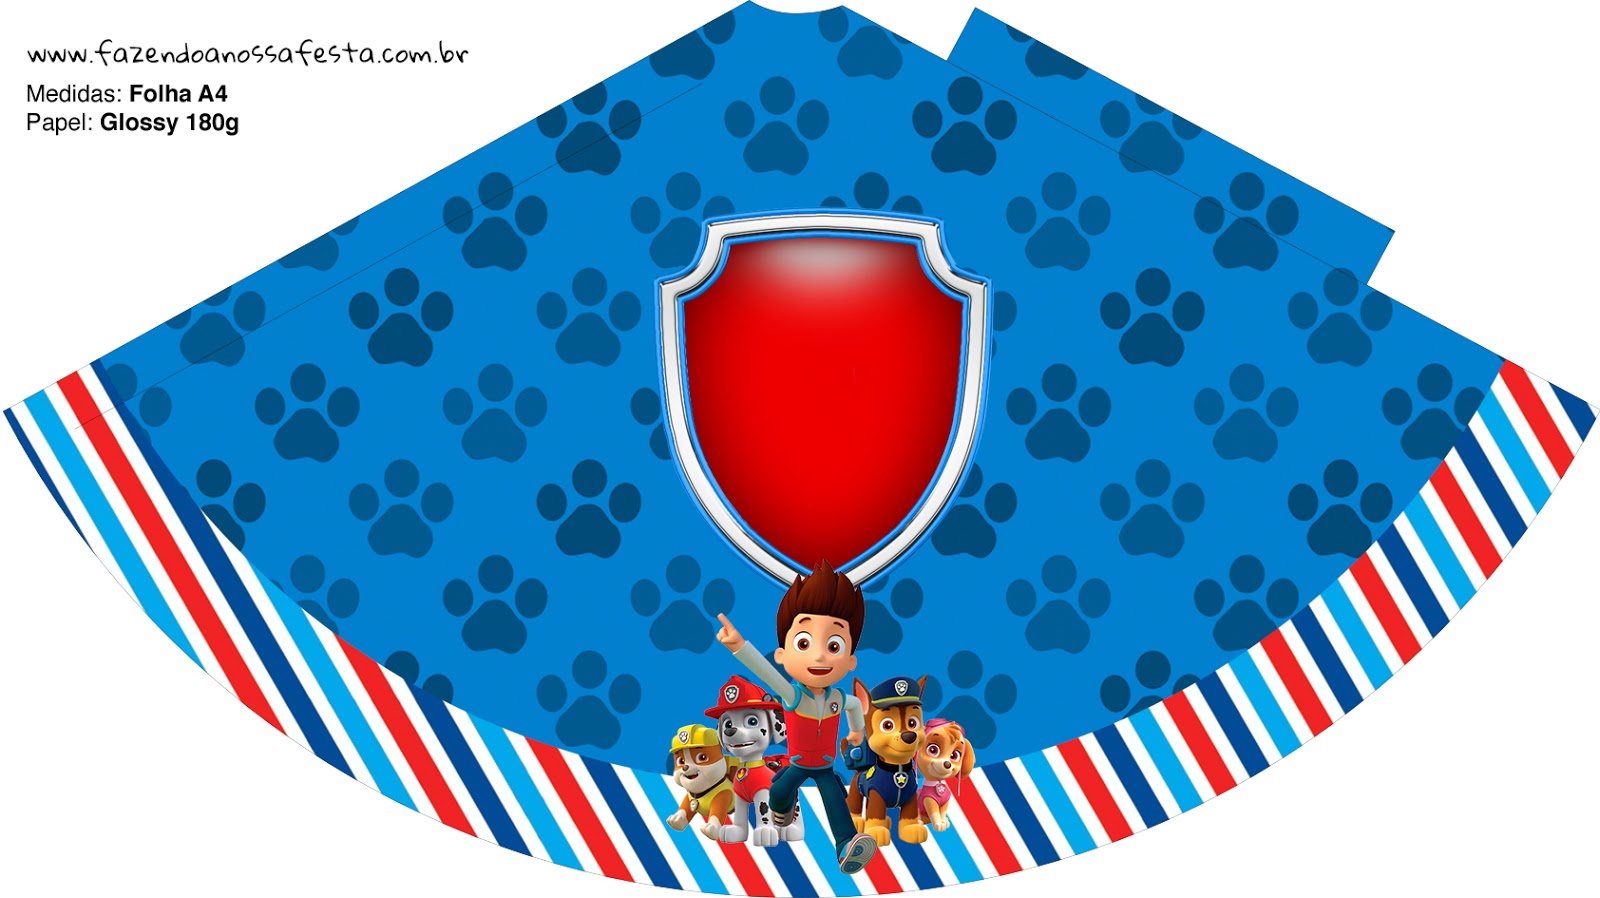 Paw Patrol Free Party Printables. Oh My Fiesta! in english